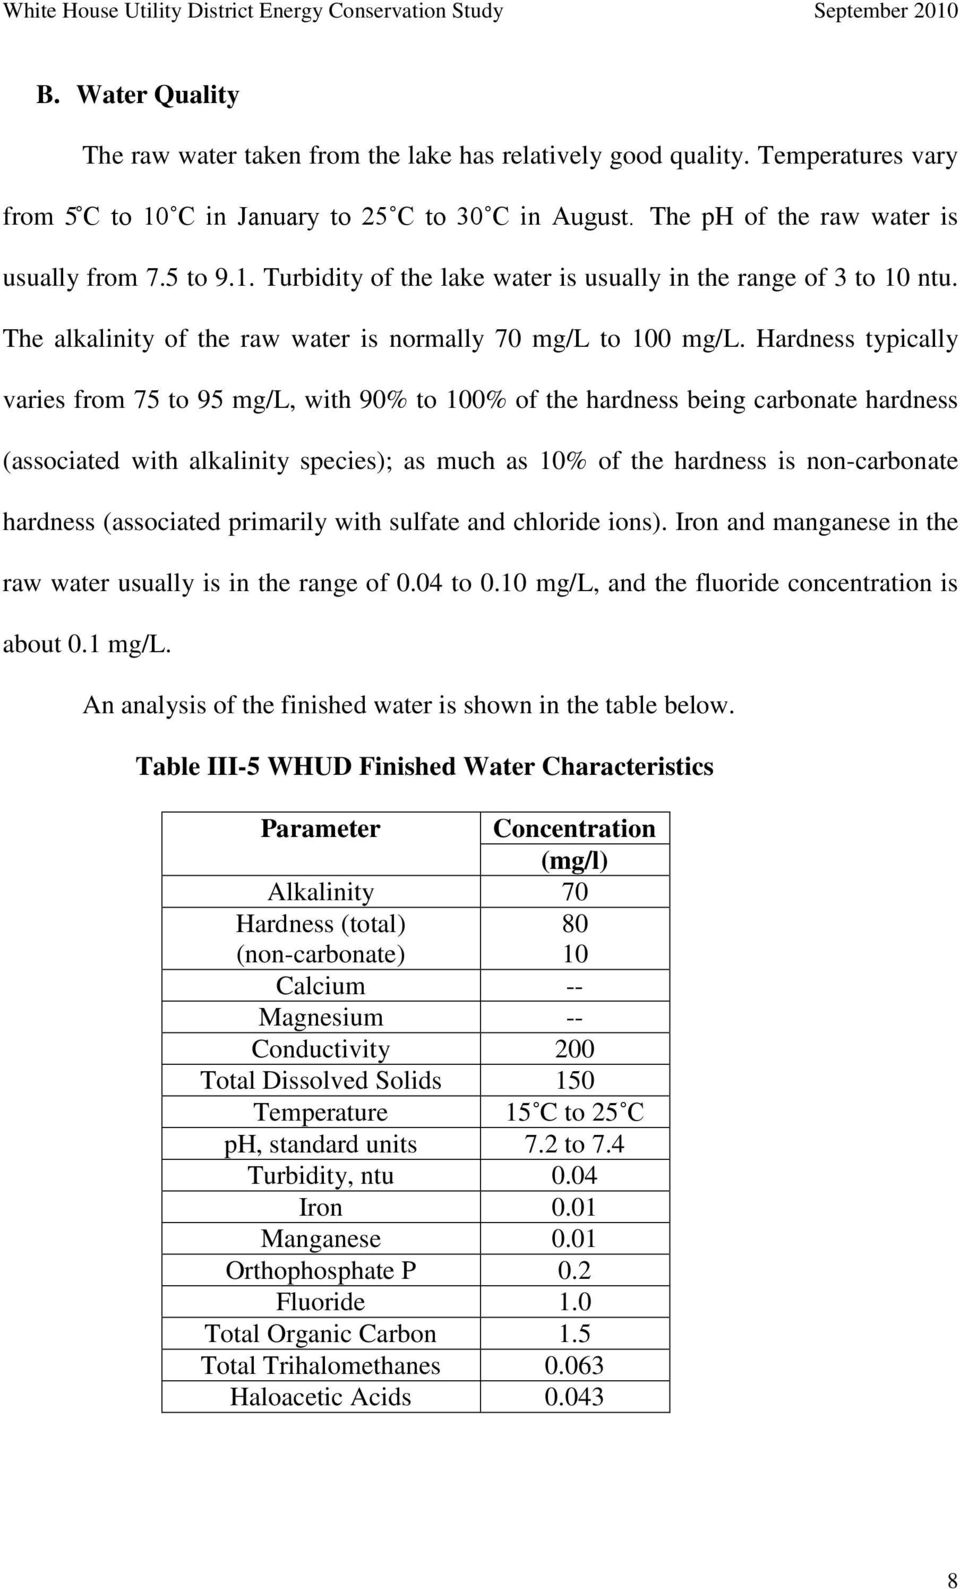 Hardness typically varies from 75 to 95 mg/l, with 90% to 100% of the hardness being carbonate hardness (associated with alkalinity species); as much as 10% of the hardness is non-carbonate hardness